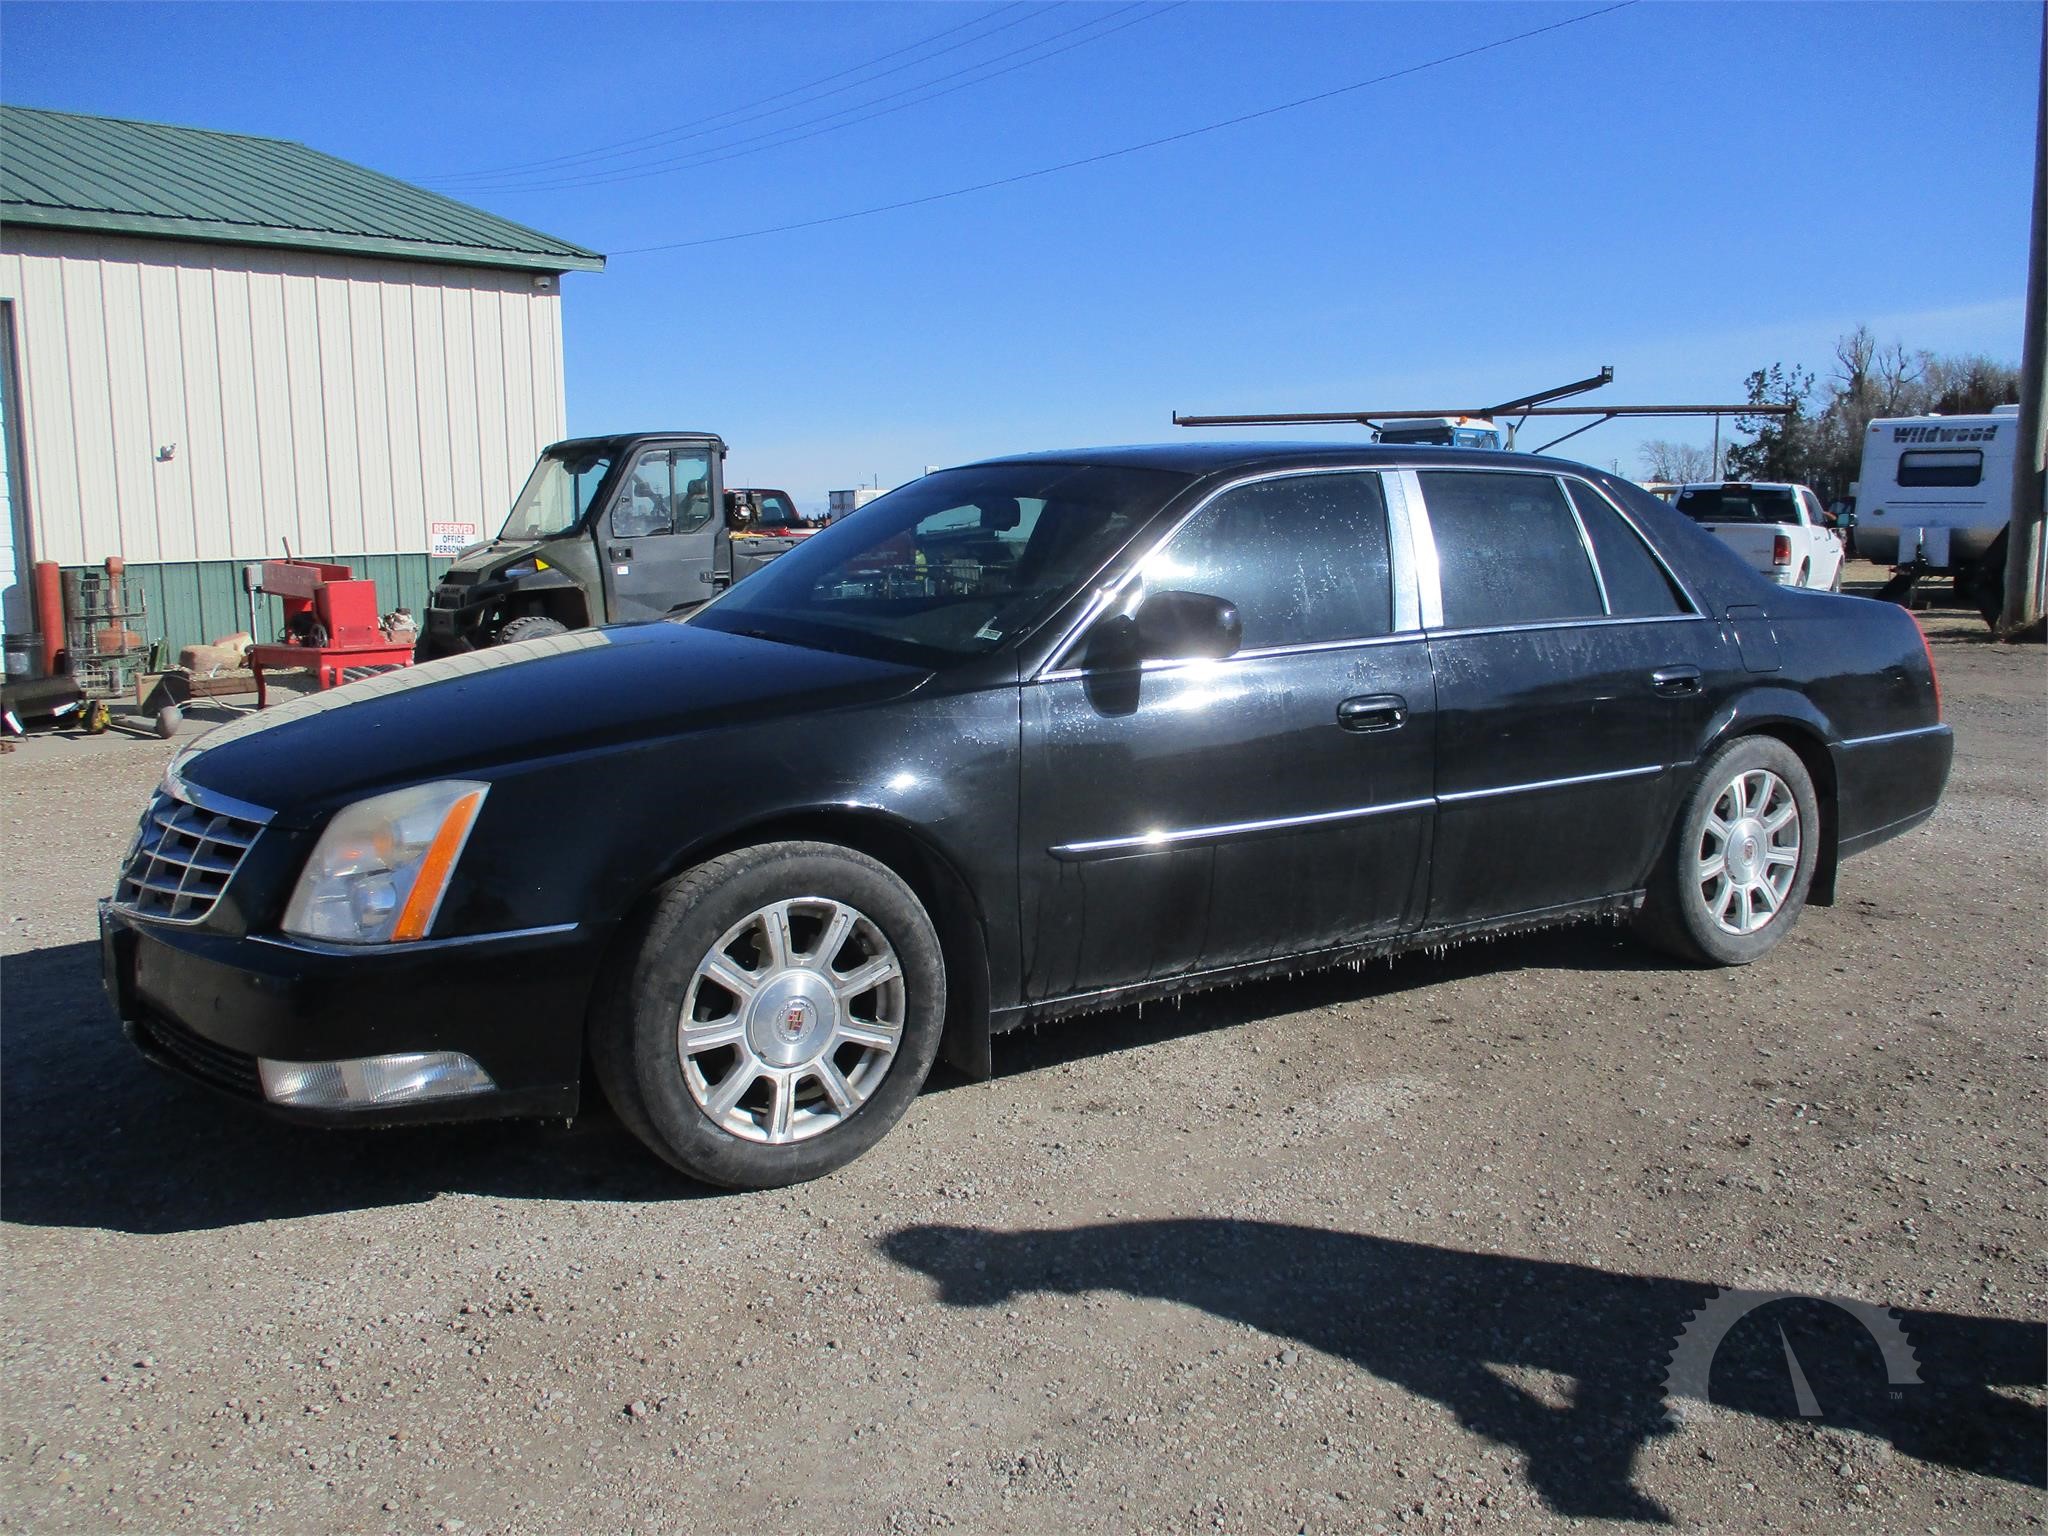 CADILLAC Otherstock Online Auction Results - 49 Listings 